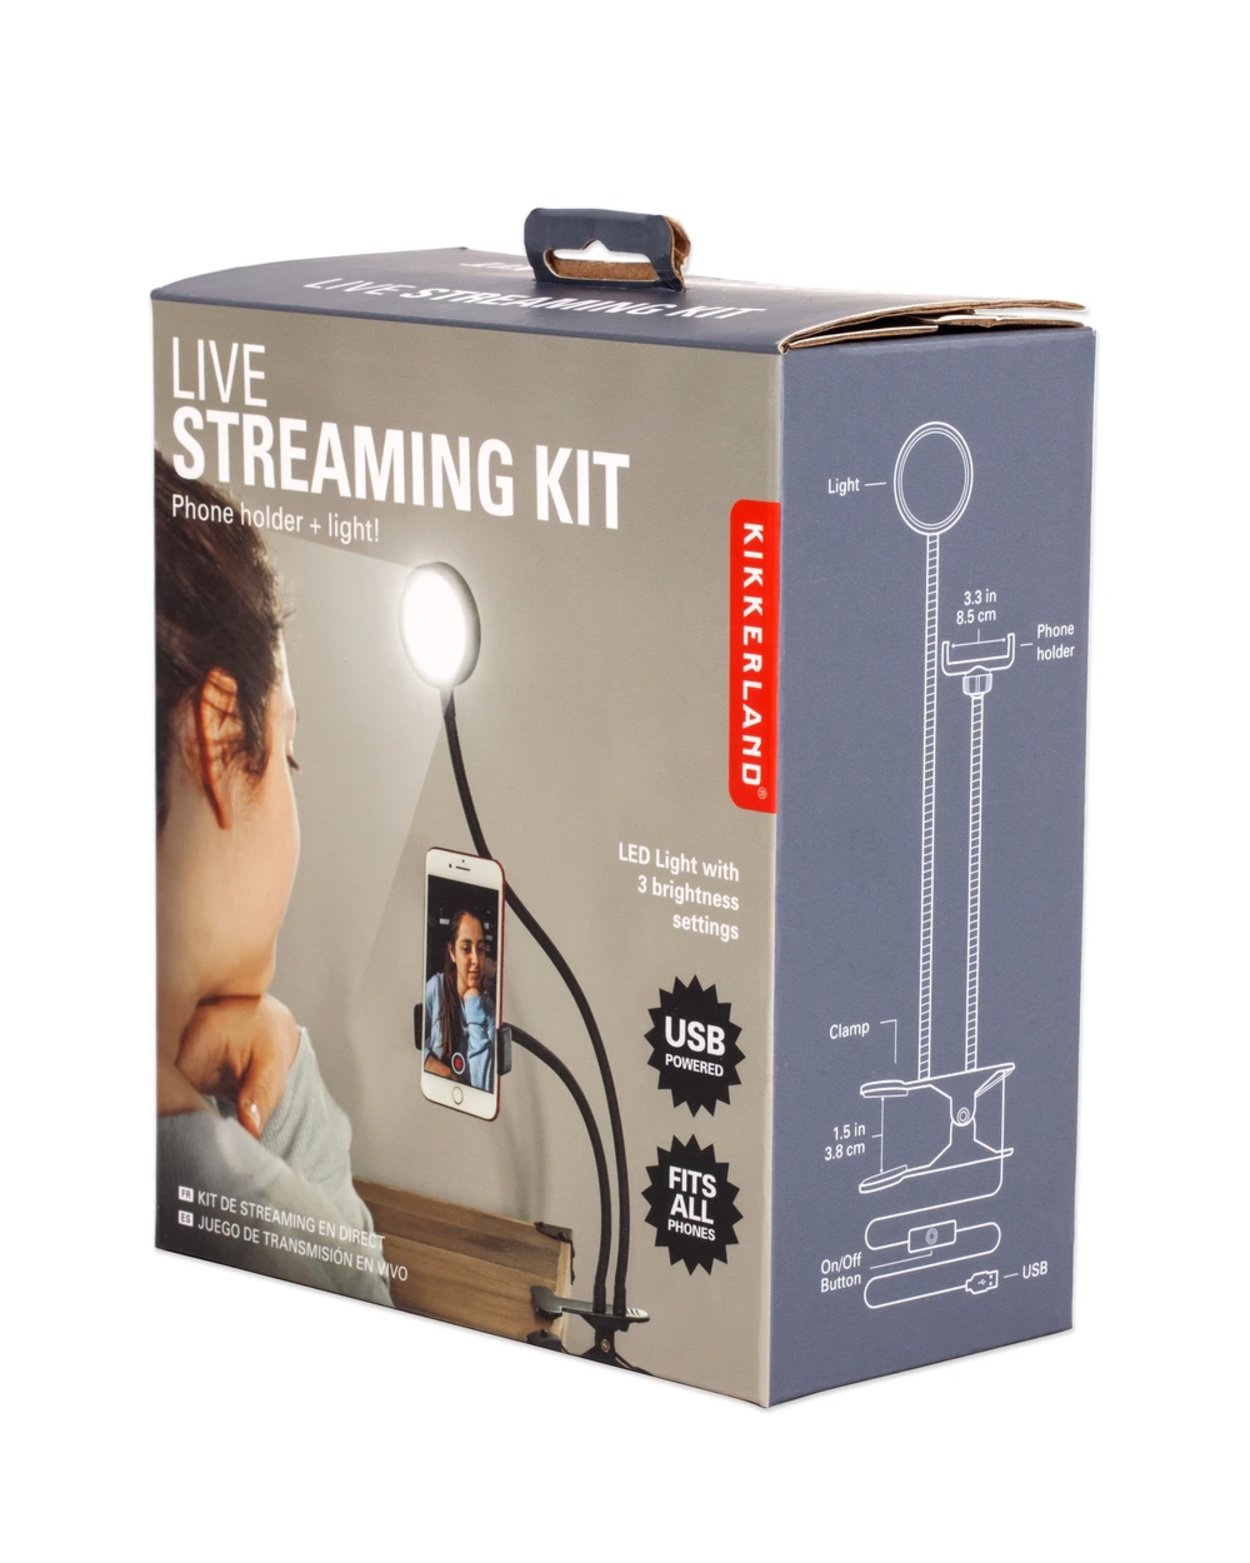 Fabulous Gifts | Kikkerland - Live Streaming Kit by Weirs of Baggot Street